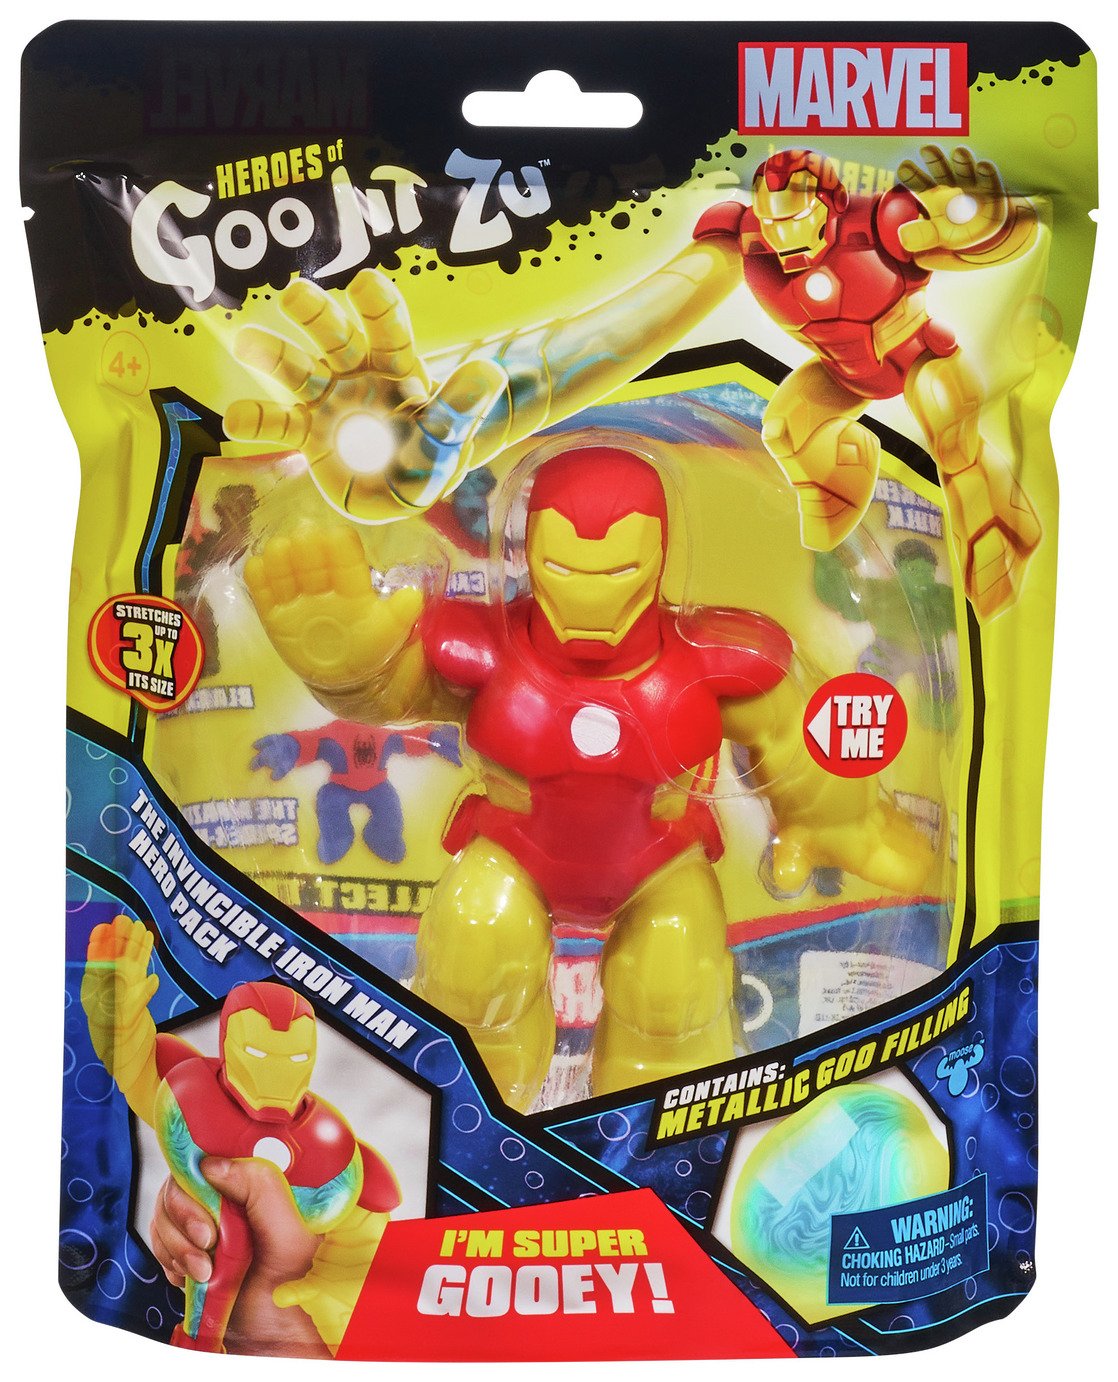 Heroes of Goo Jit Zu The Invincible Iron Man S5 Figure review